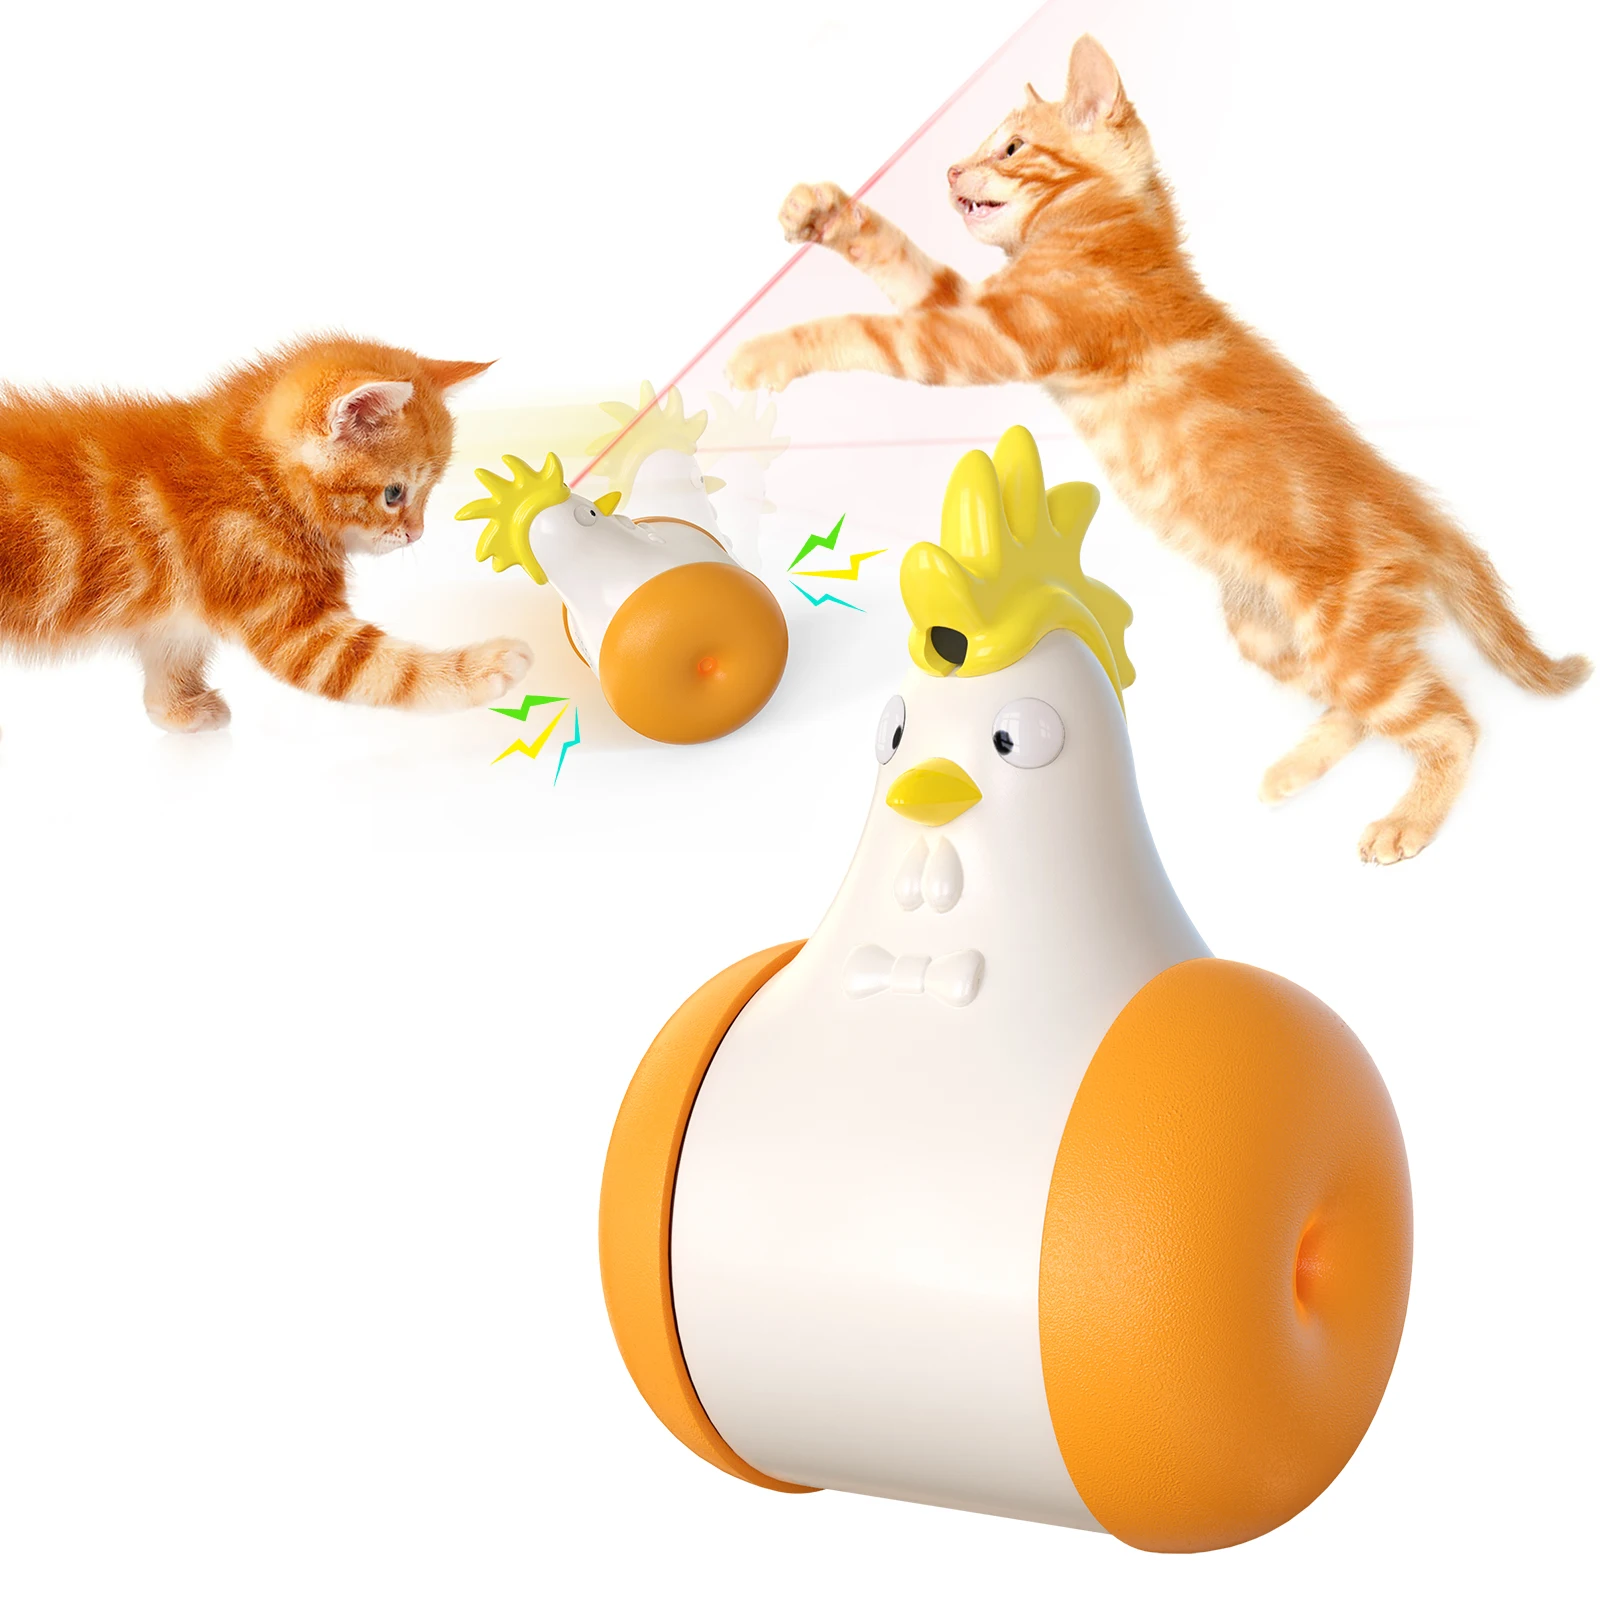 

Interactive Electric Cat Ball Toys Chicken Sound LED Light 3 In 1 Cat Laser Toy Automatic 360 Rolling Pet Toys, Orange,yellow,blue,light blue